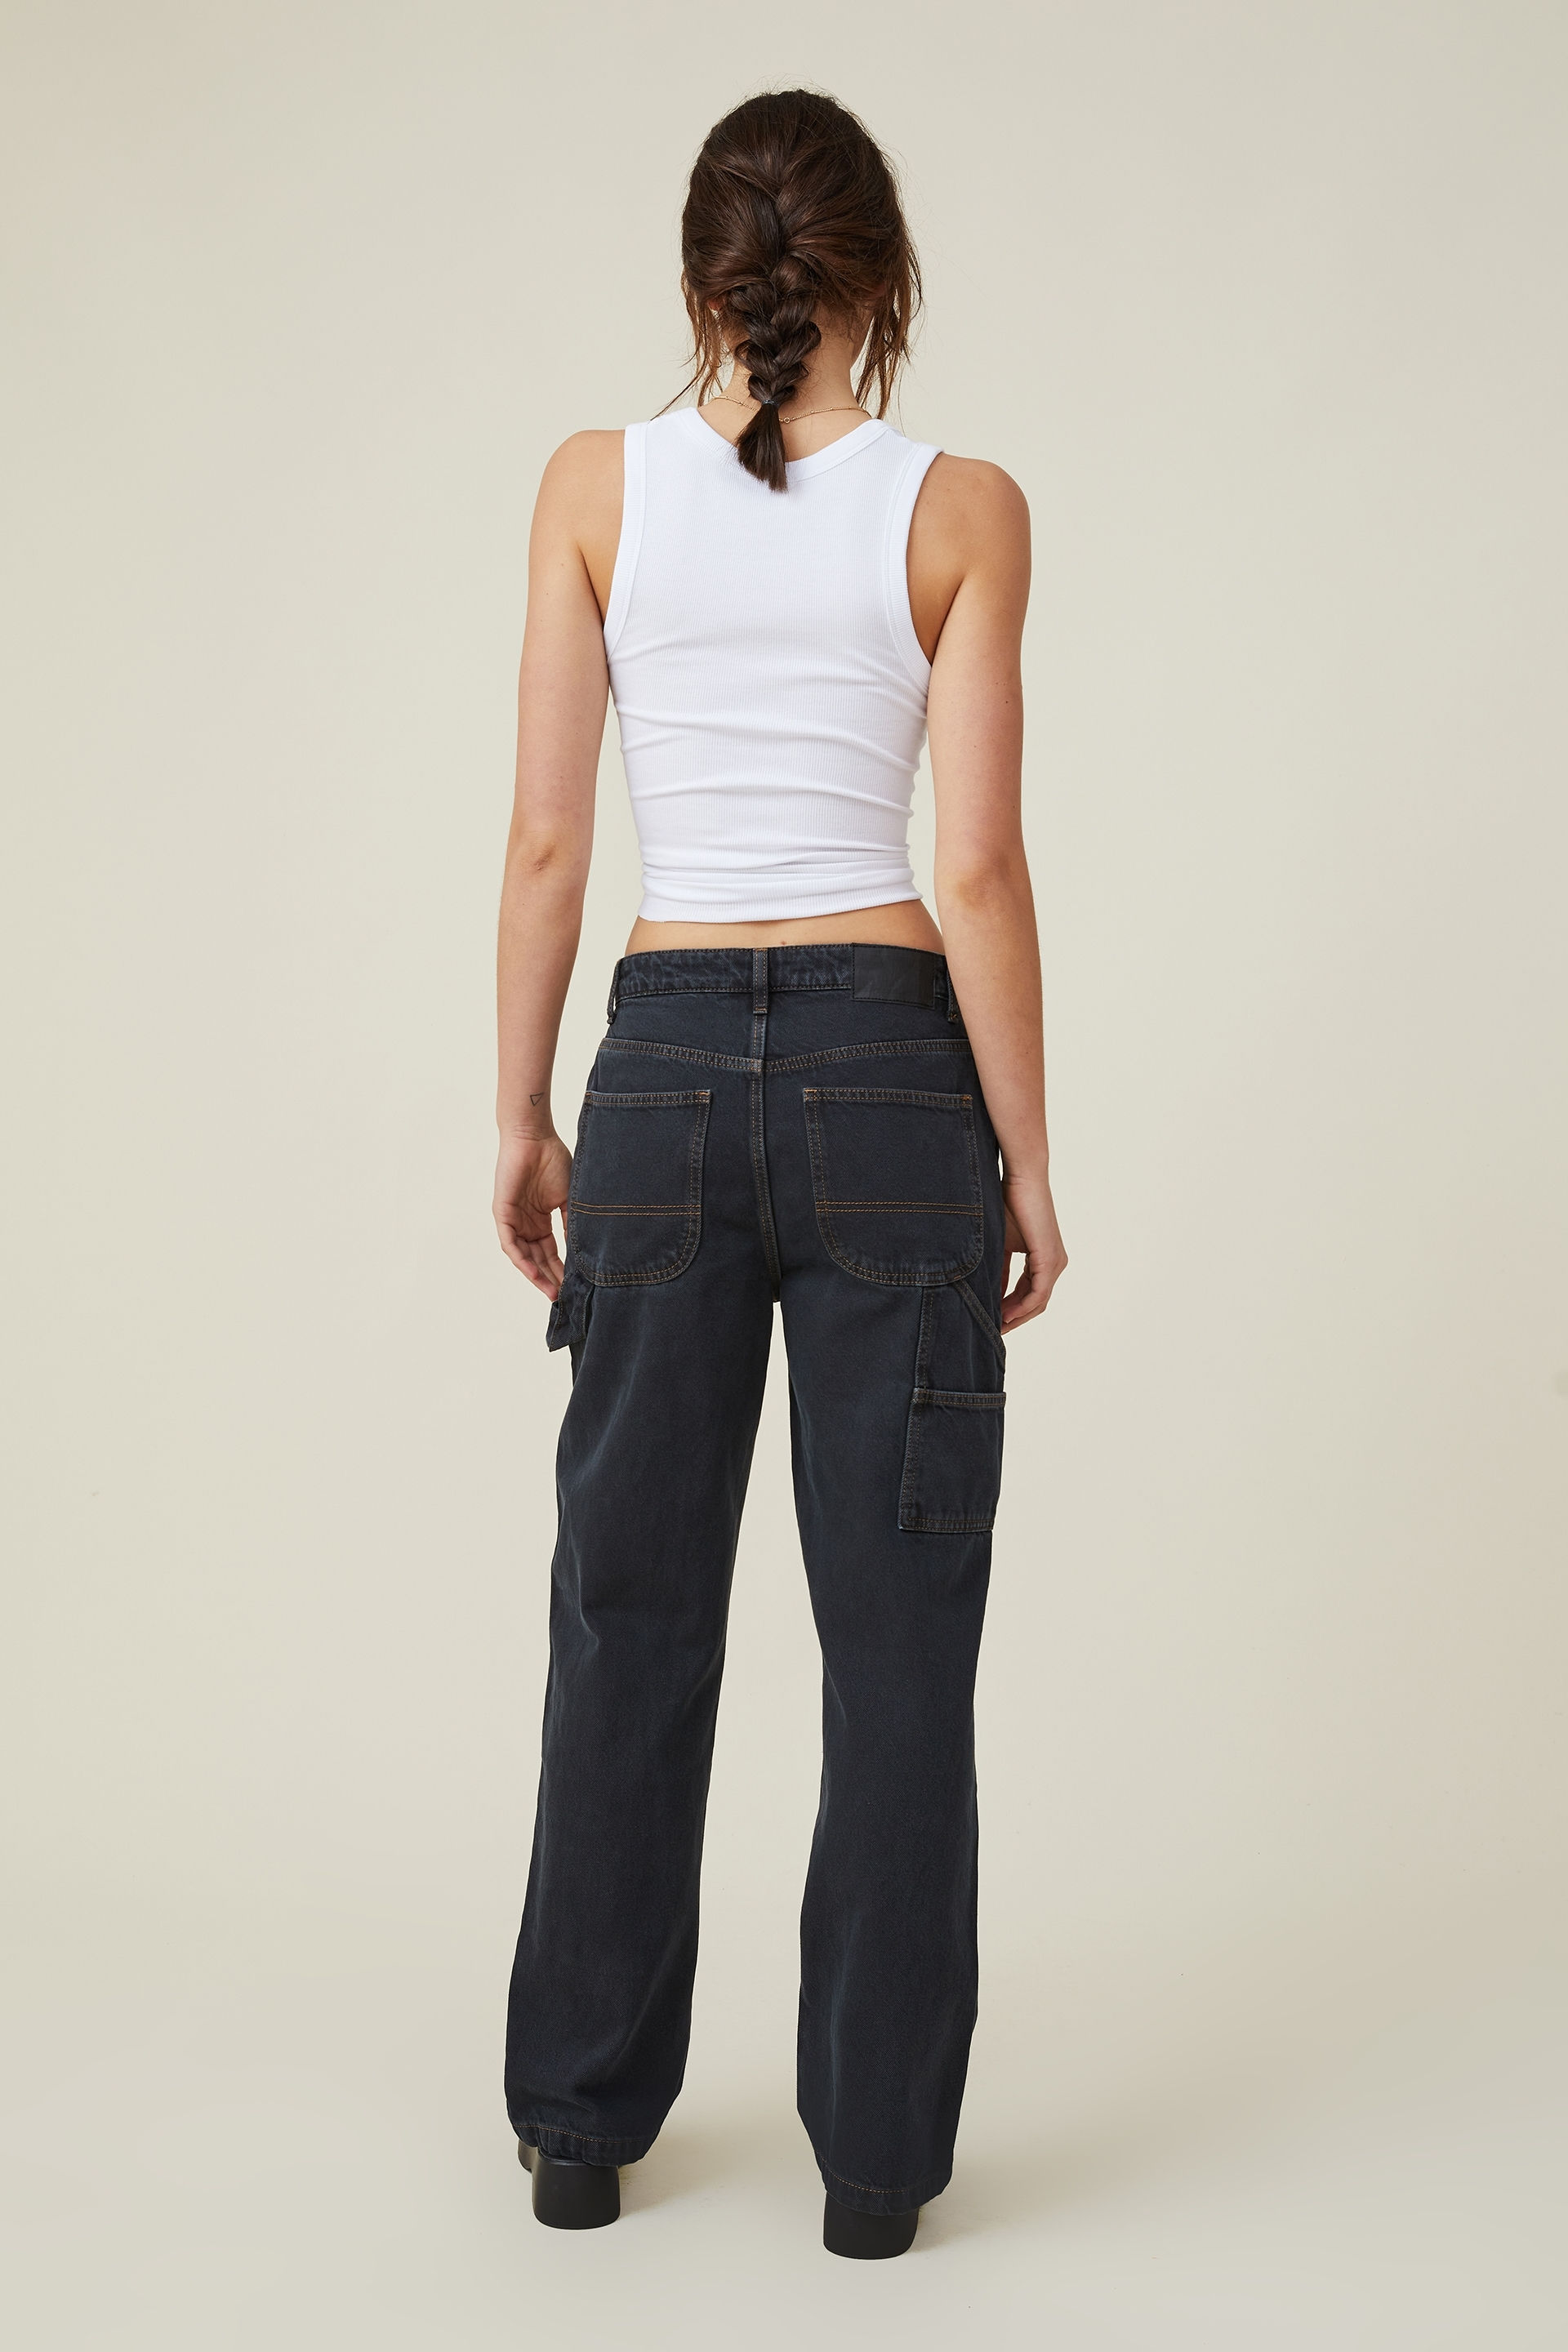 Buy Blue Jeans & Jeggings for Girls by POINT COVE Online | Ajio.com